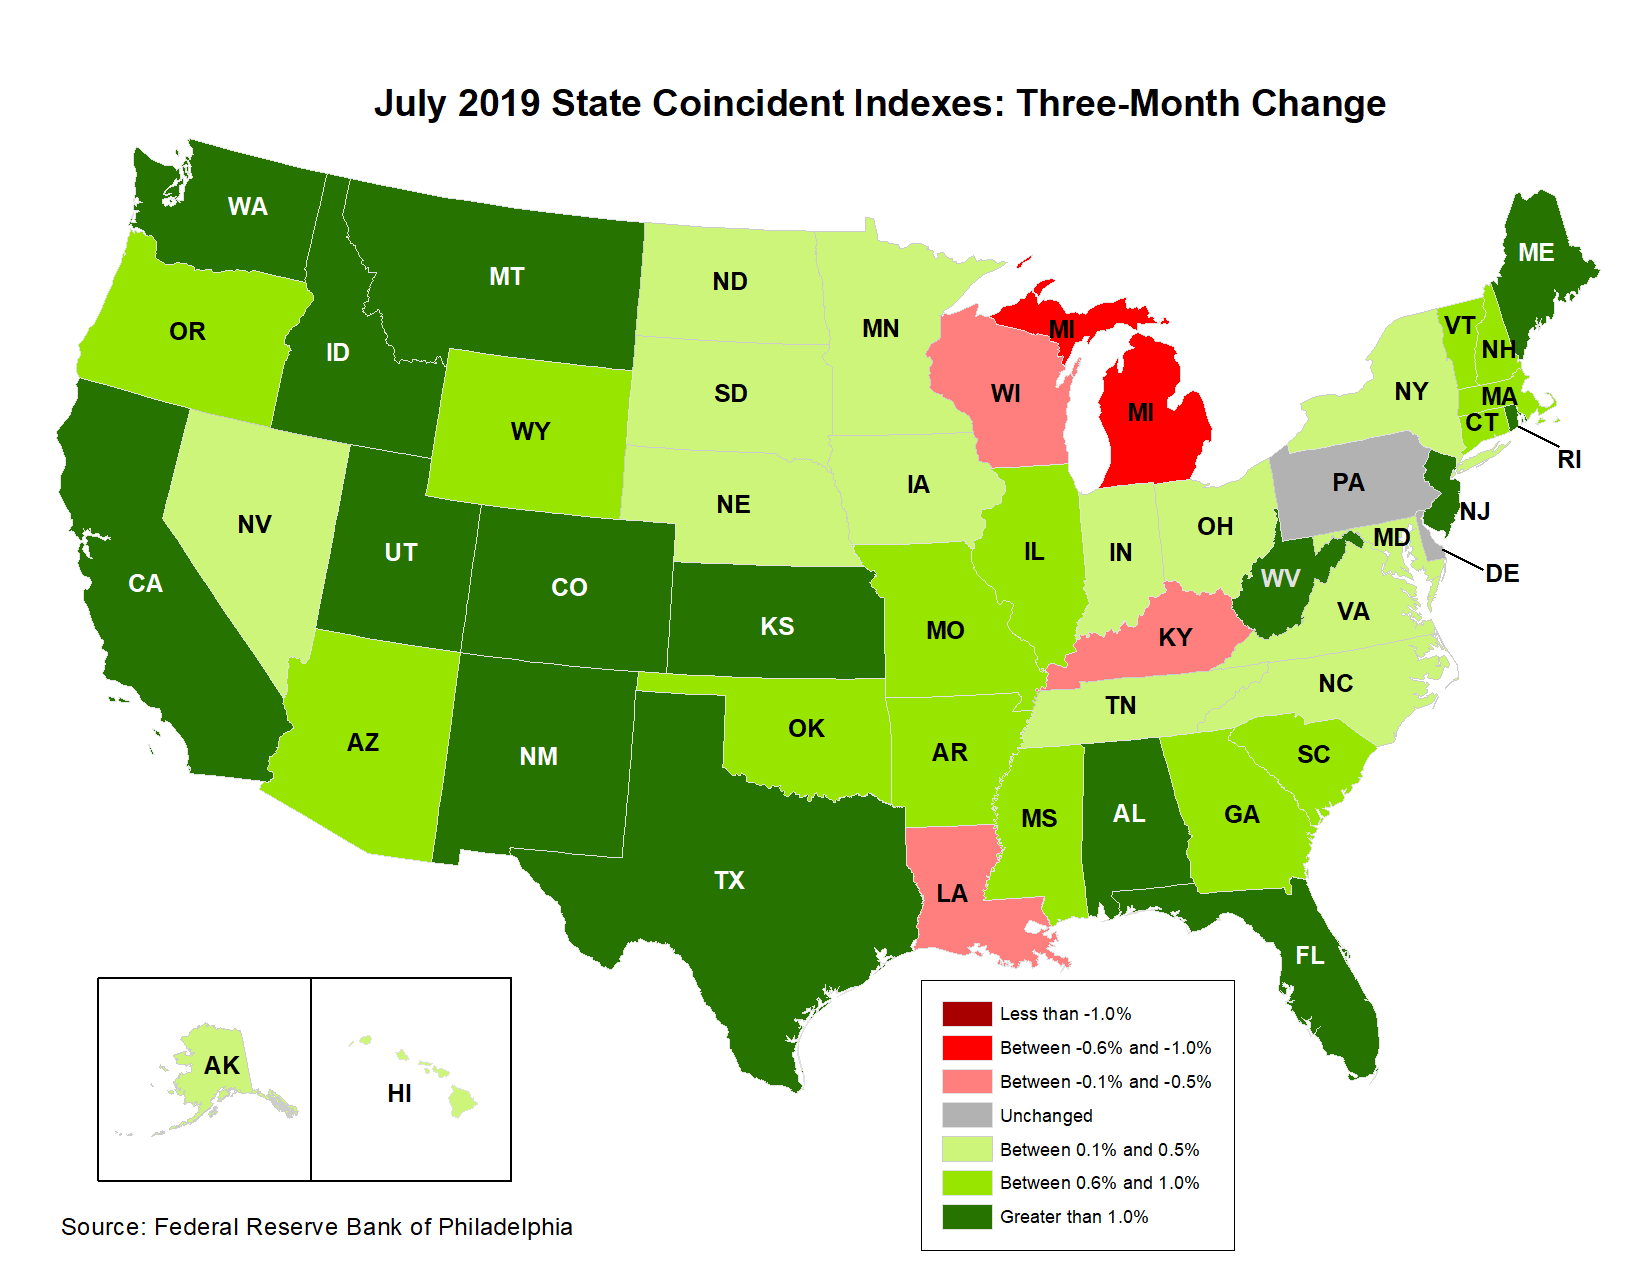 Map of the U.S. showing the State Coincident Indexes Three-Month Change in July 2019